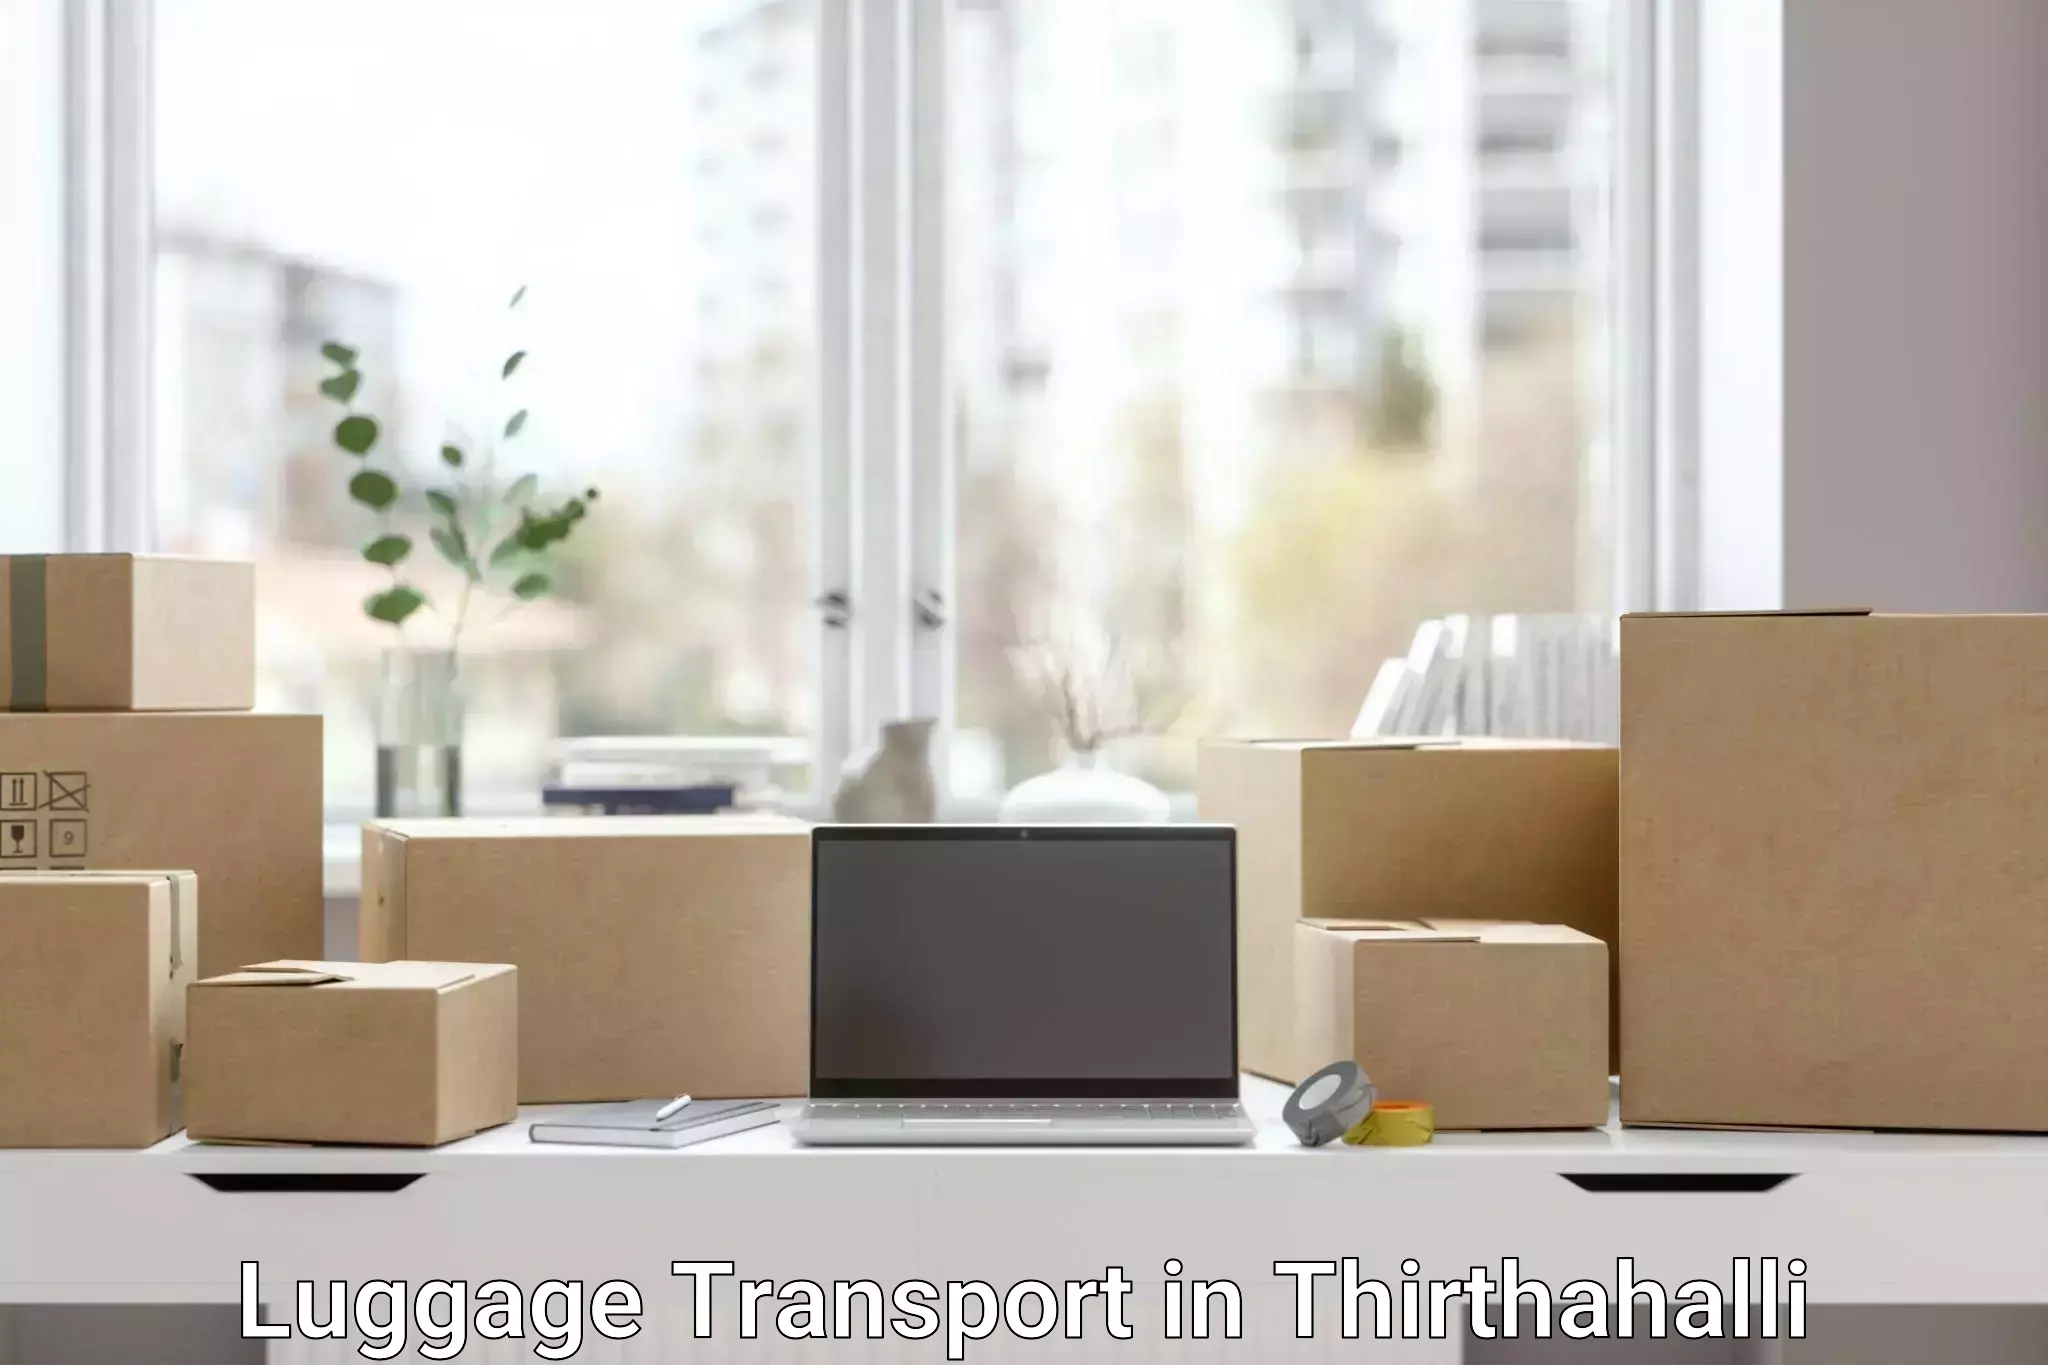 Baggage transport services in Thirthahalli